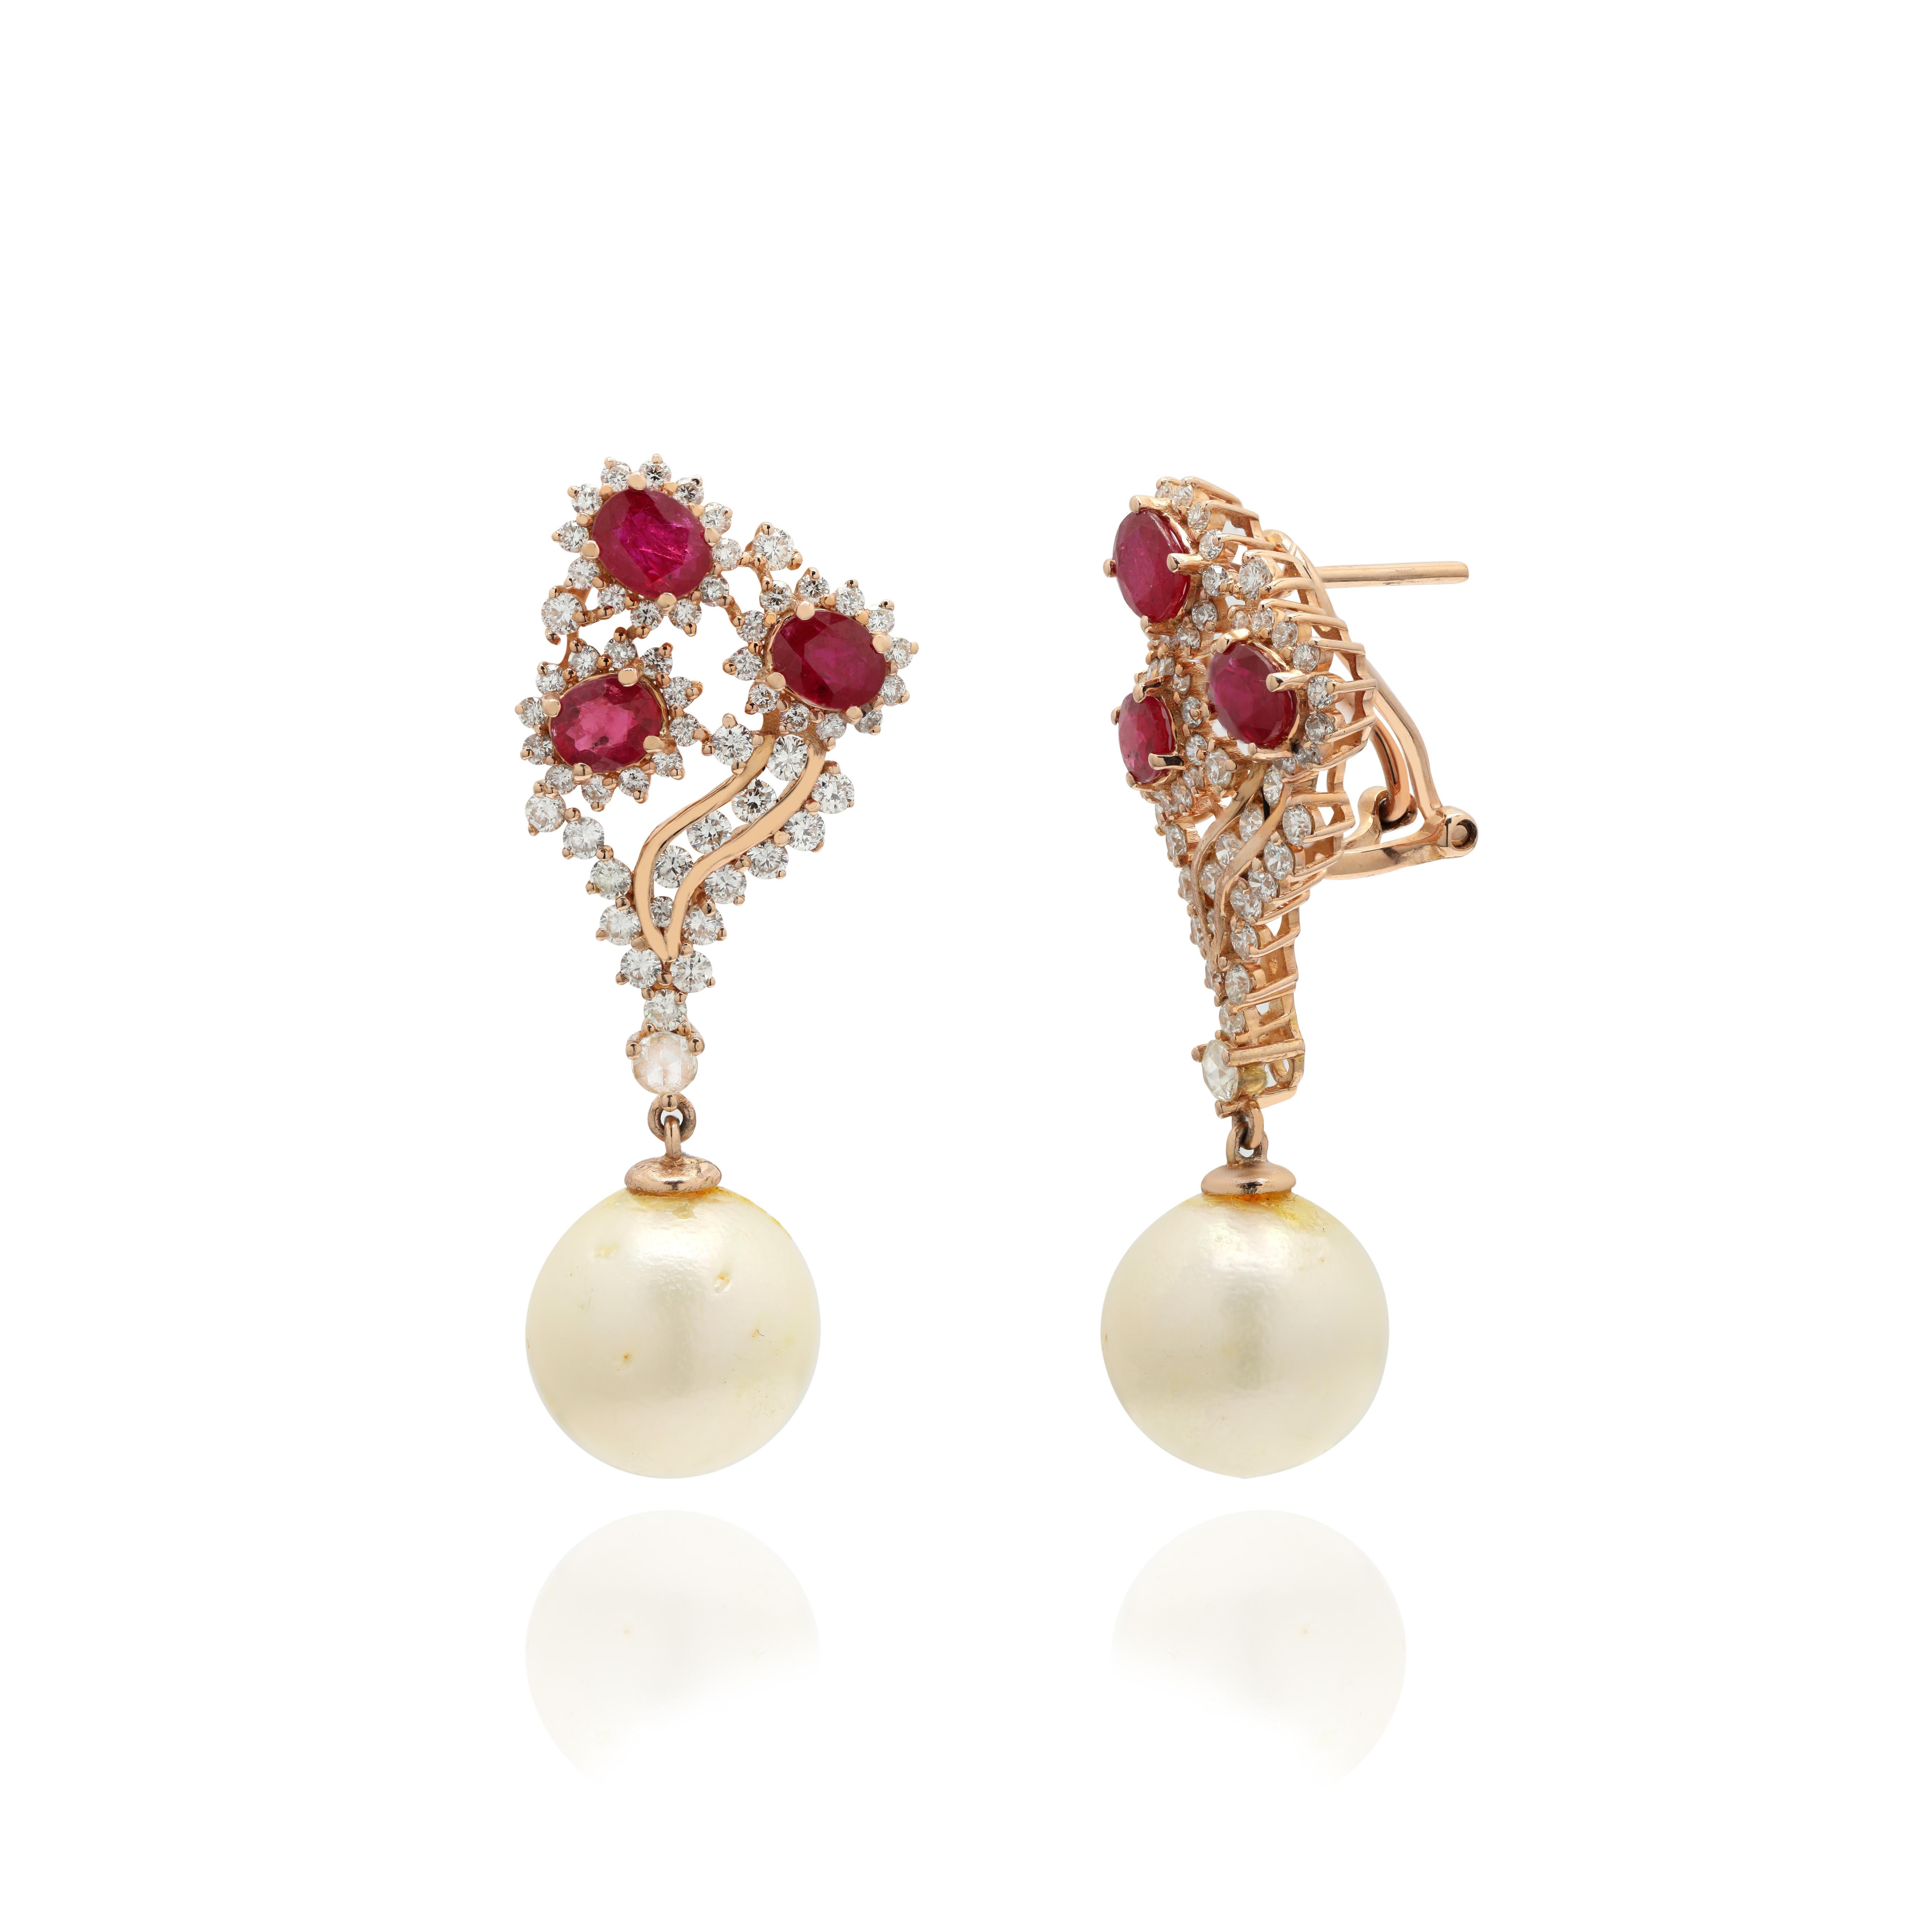 Ruby, pearl and diamond dangle earrings to make a statement with your look. These earrings create a sparkling, luxurious look featuring oval and round cut gemstone.
If you love to gravitate towards unique styles, this piece of jewelry is perfect for